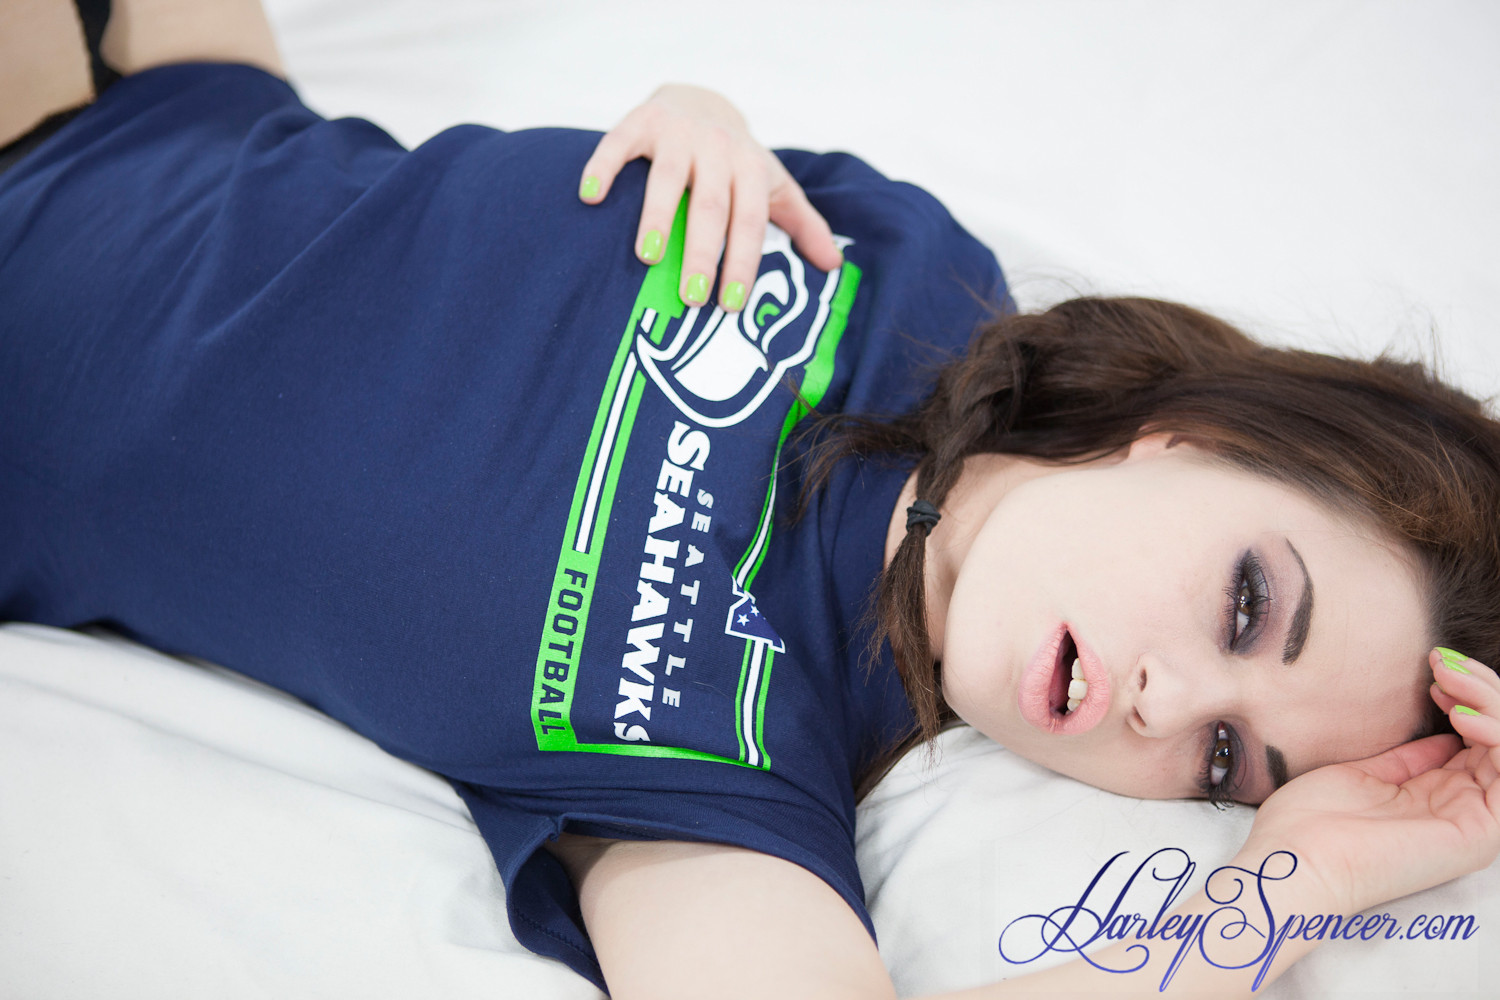 Harley Spencer flashing her tits for her Seattle SeaHawks in the superbowl #67307803